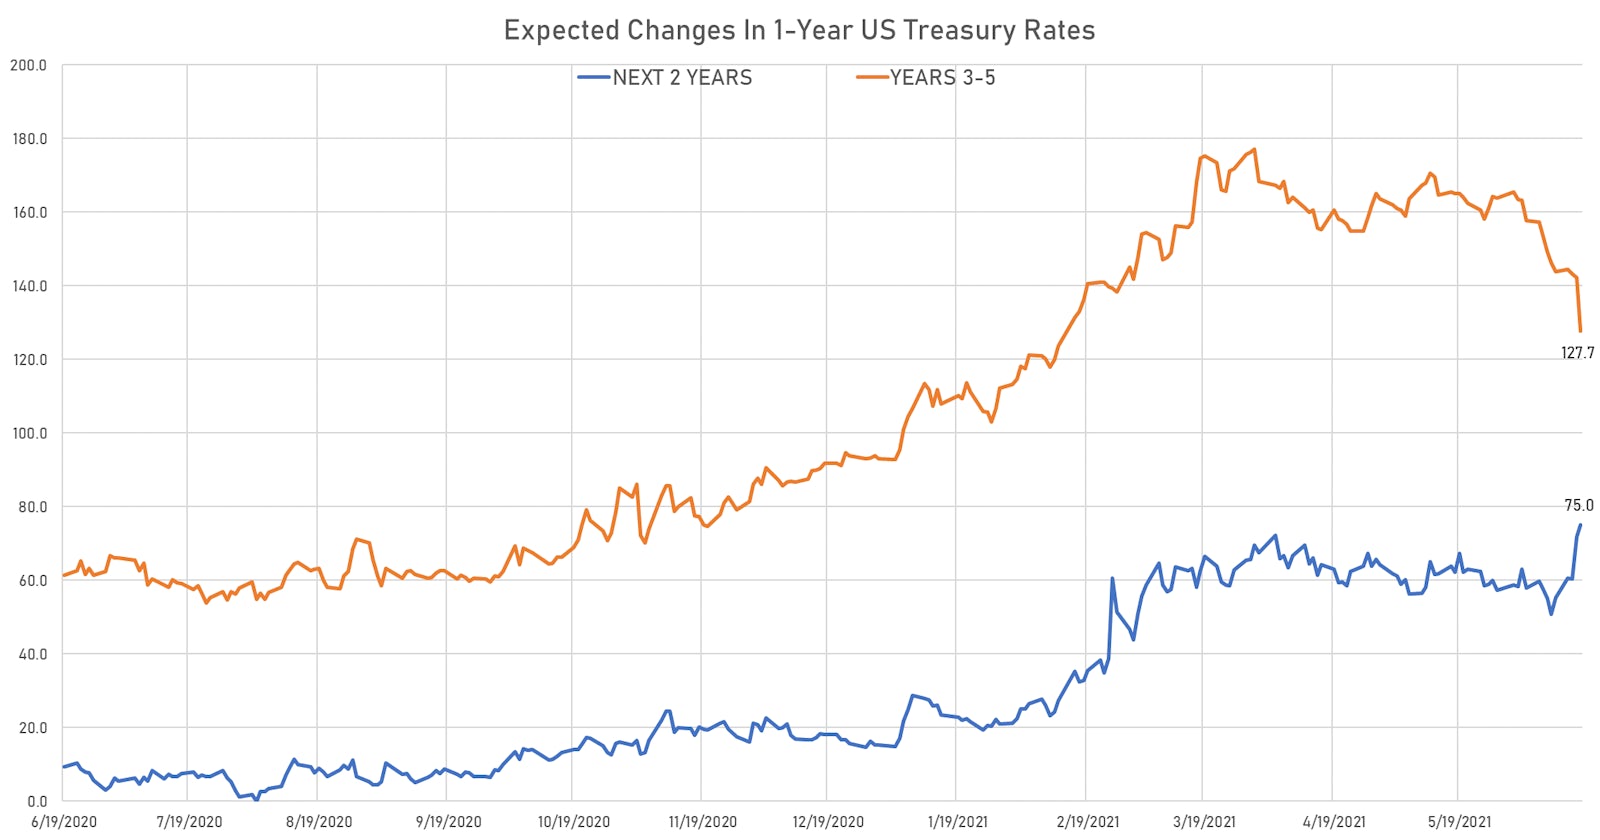 Expected Changes in US 1-Year Rate Over The Next 5 Years | Sources: ϕpost, Refinitiv data